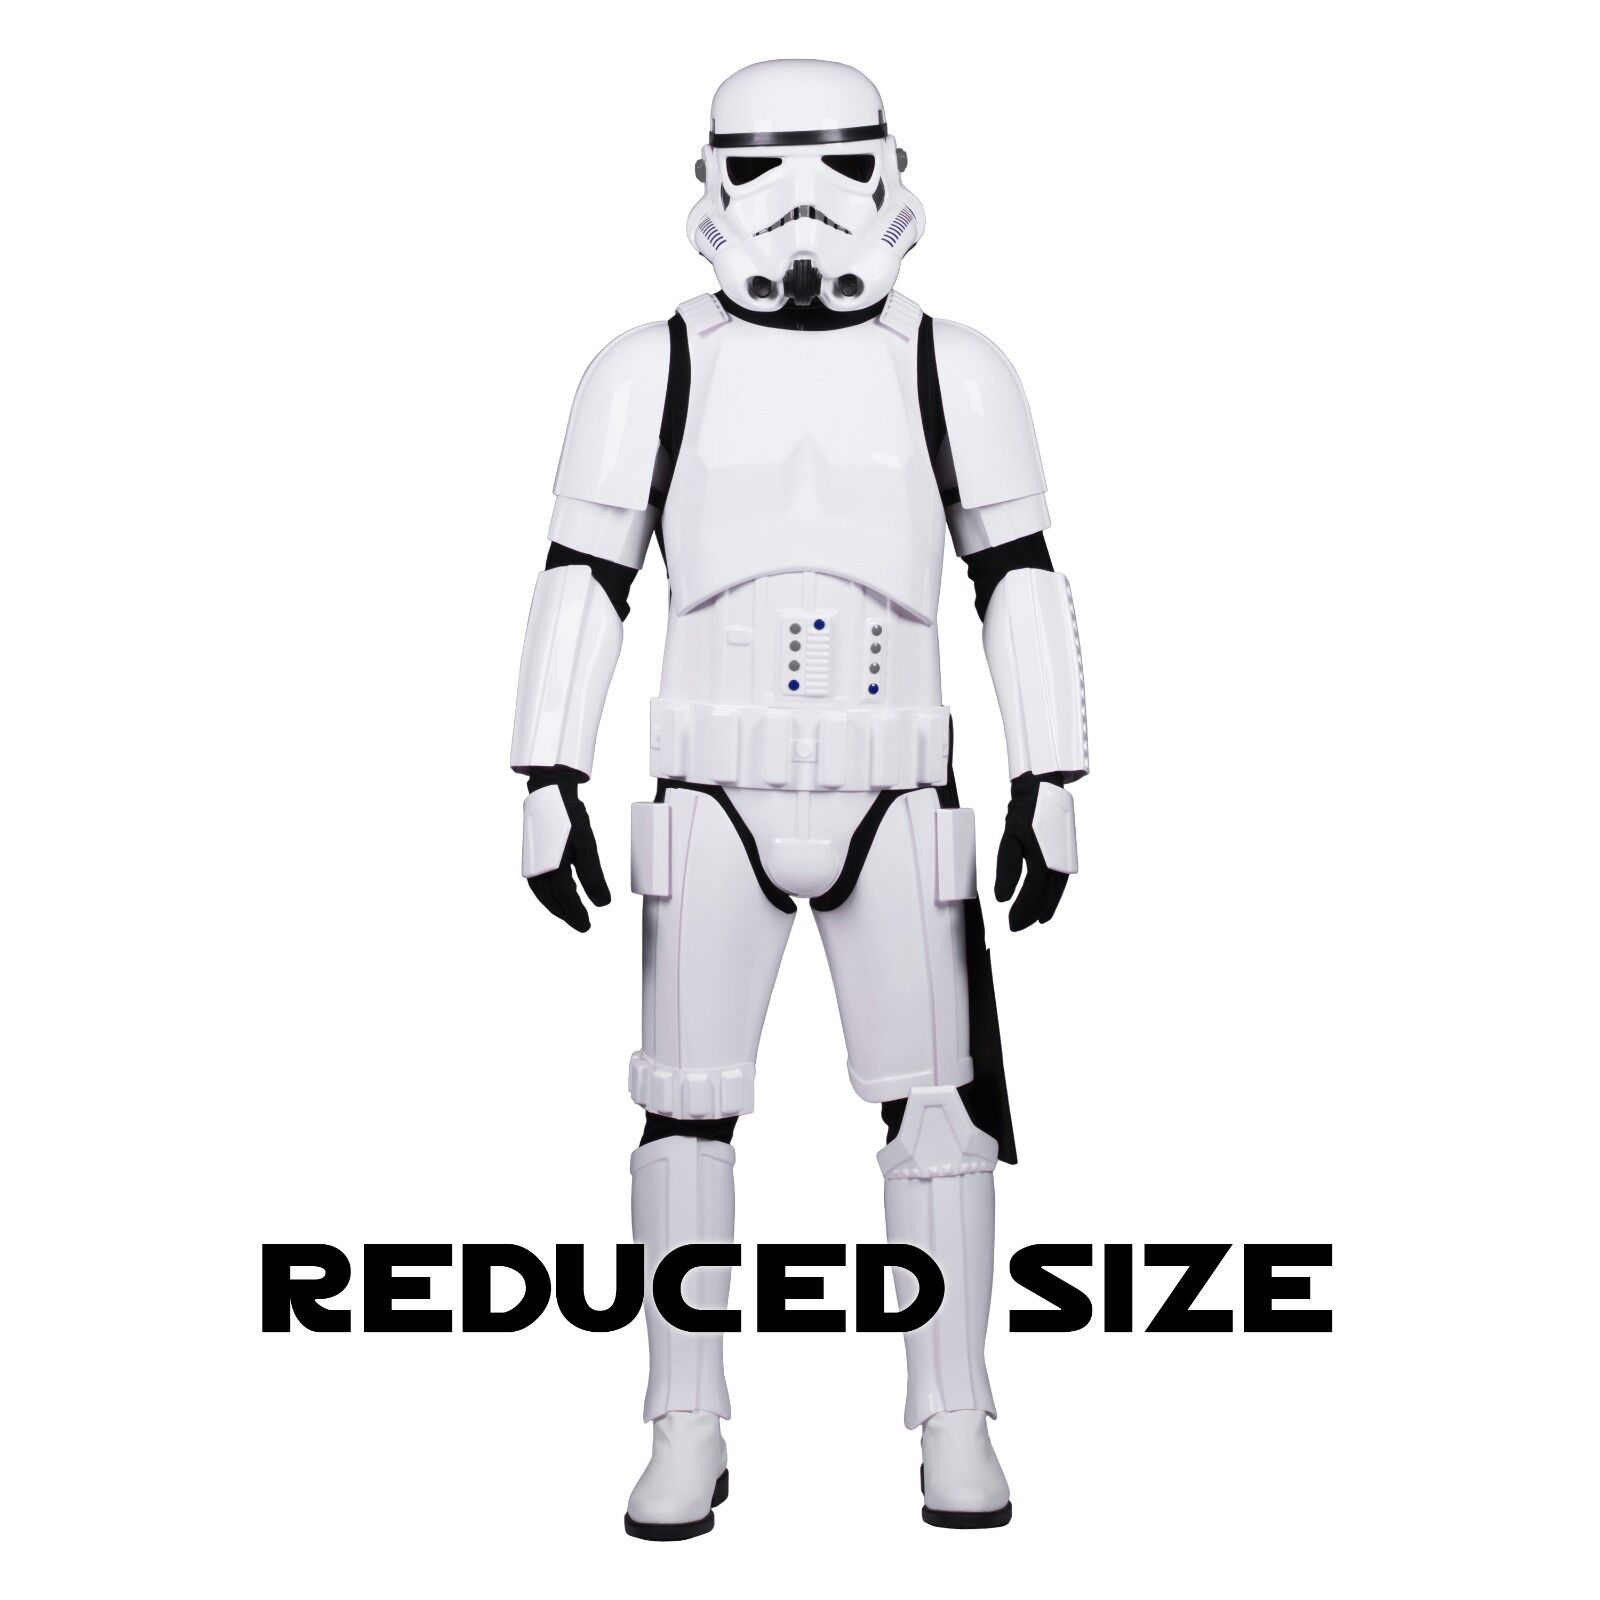 Star Wars Stormtrooper Costume Armour Package with Accessories - Reduced Size